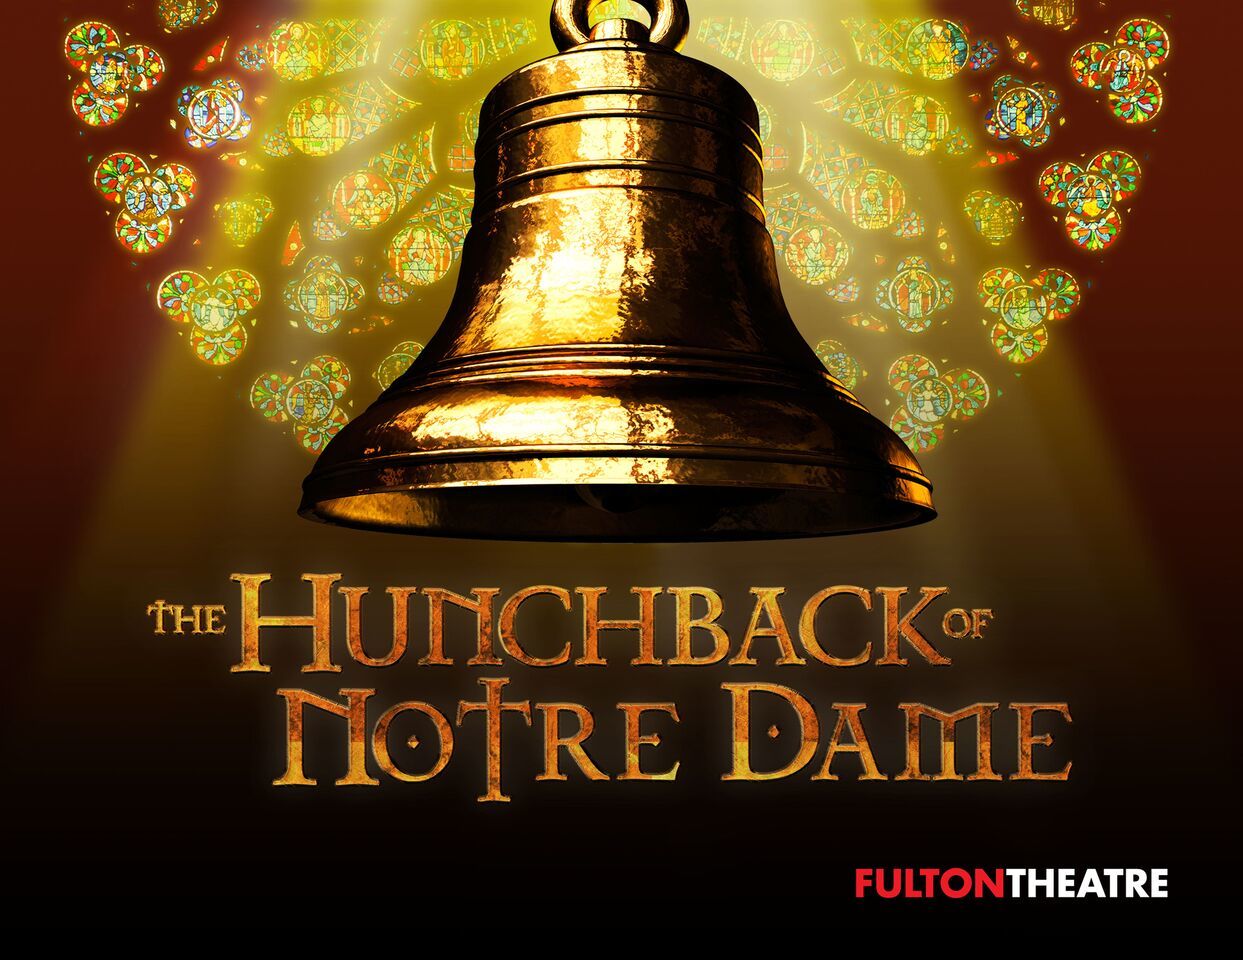 BWW Review: THE HUNCHBACK OF NOTRE DAME at Fulton Theatre 